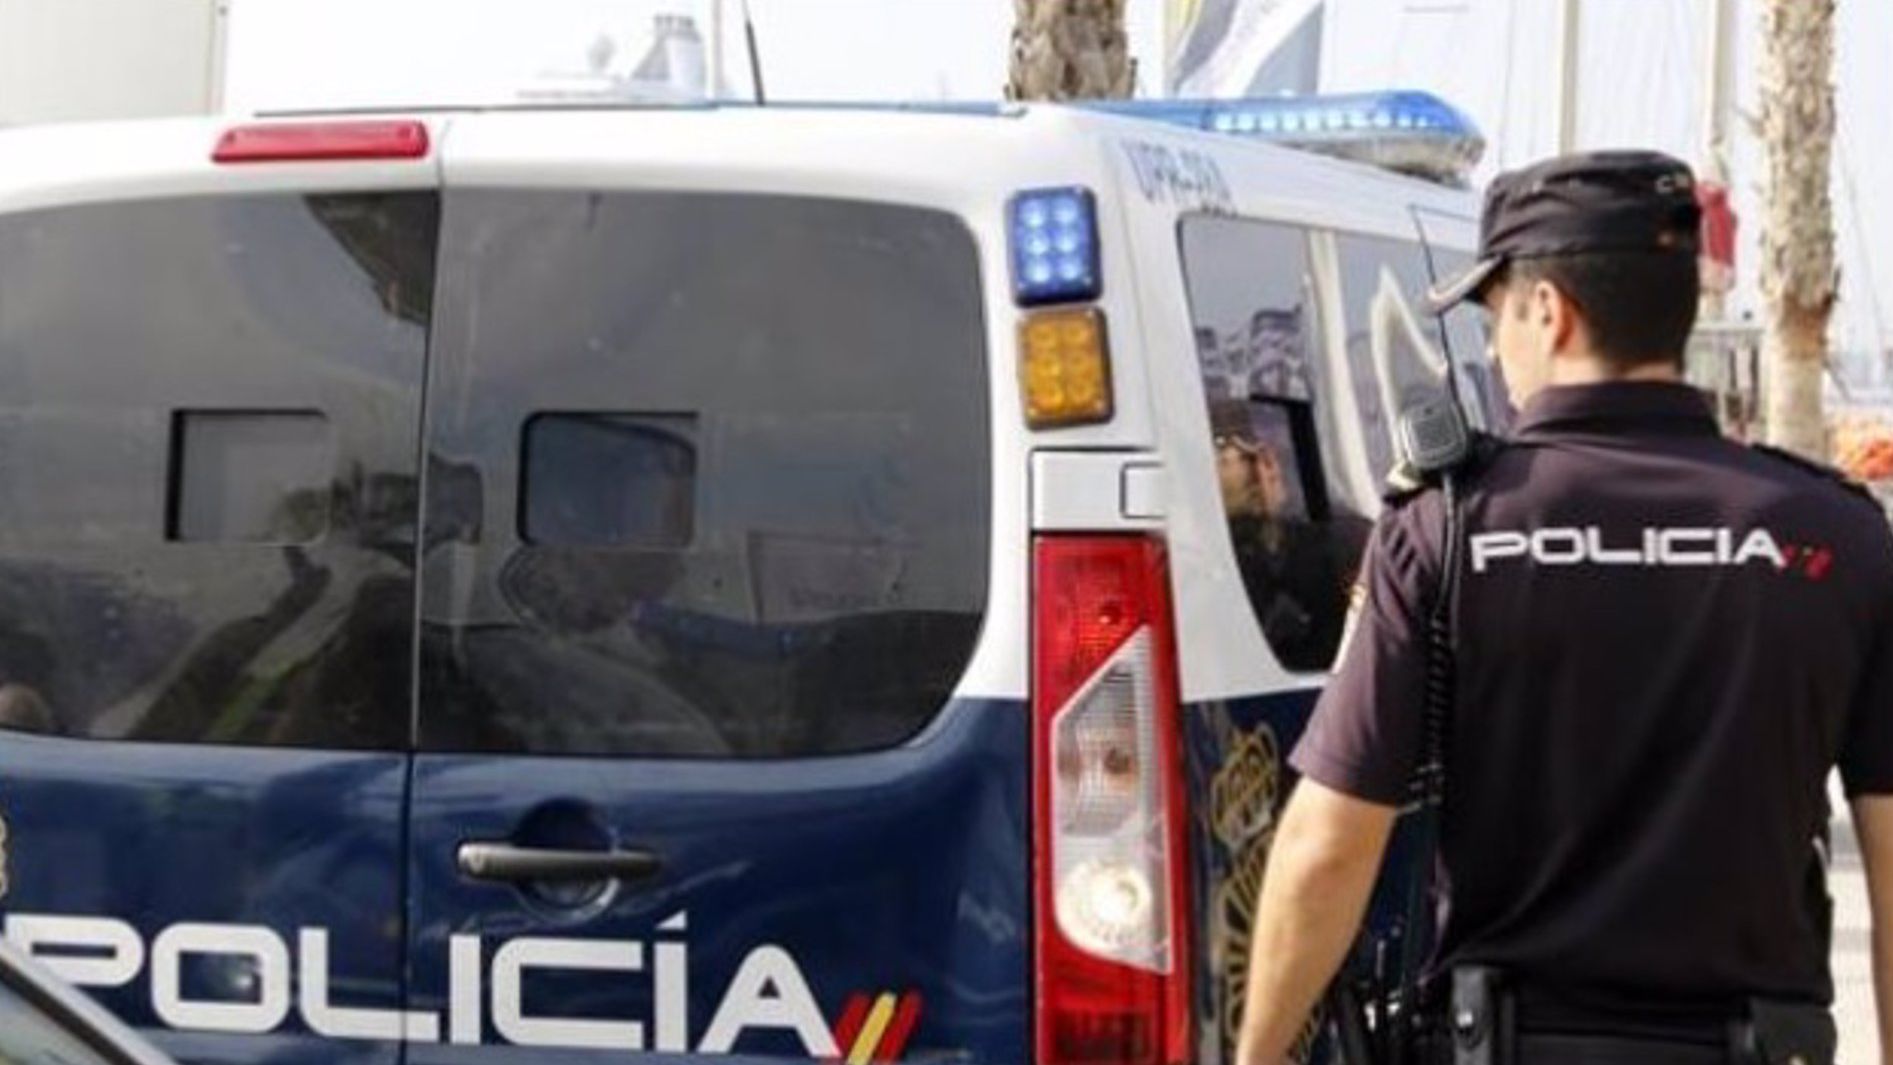 Arrested in Valencia the chief of a sect accused of mistreating and sexually abusing a follower